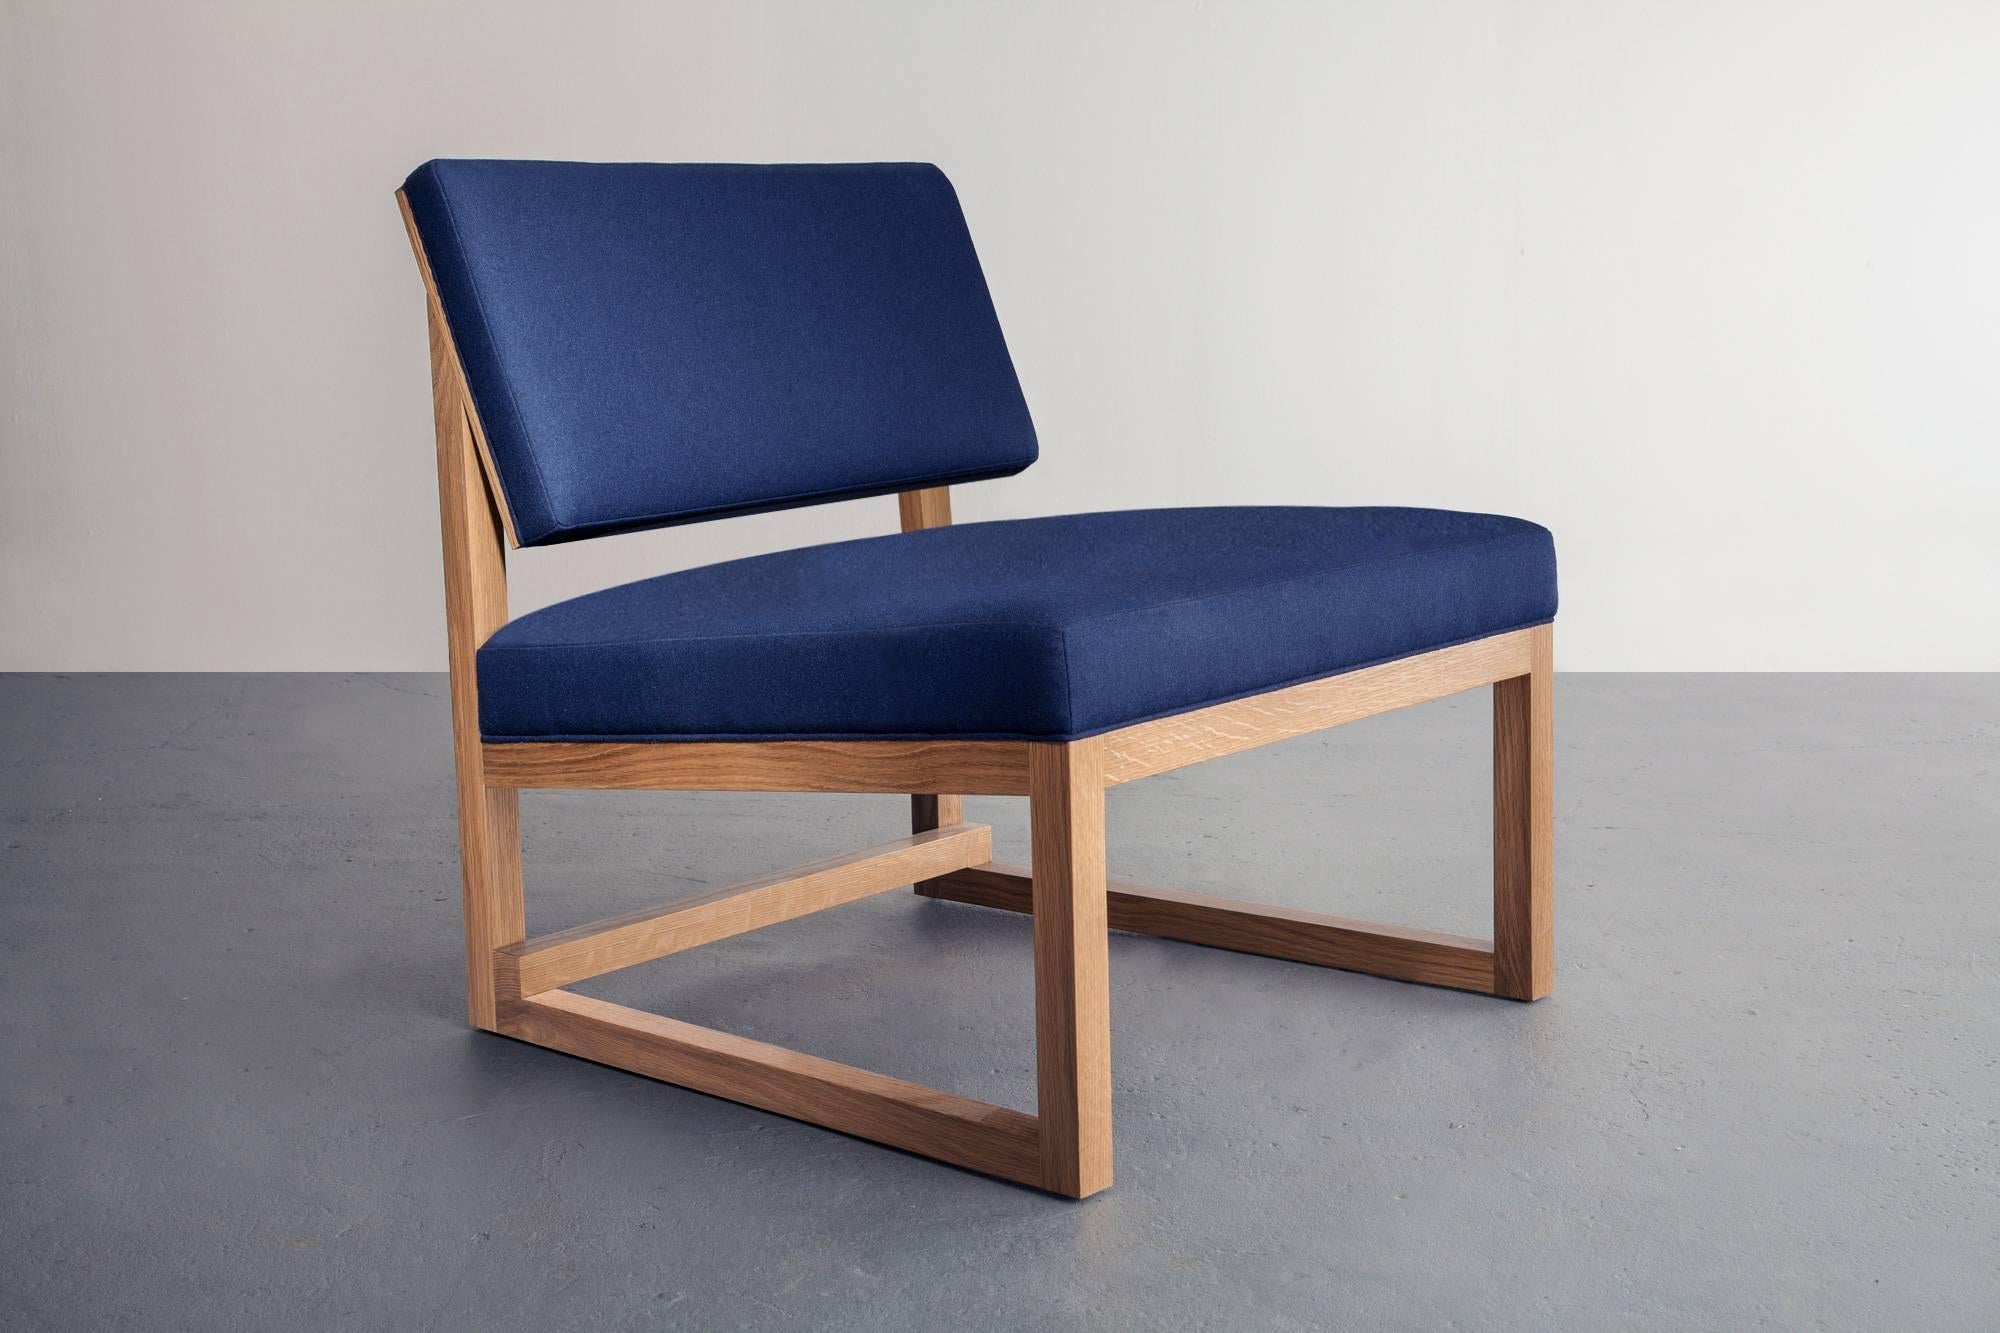 
Available in solid white oak, maple or walnut
Upholstery in Divina MD wool felt by Kvadrat, or boucle by designtex
Also available in cusomer's own material or leather (COM and COL)